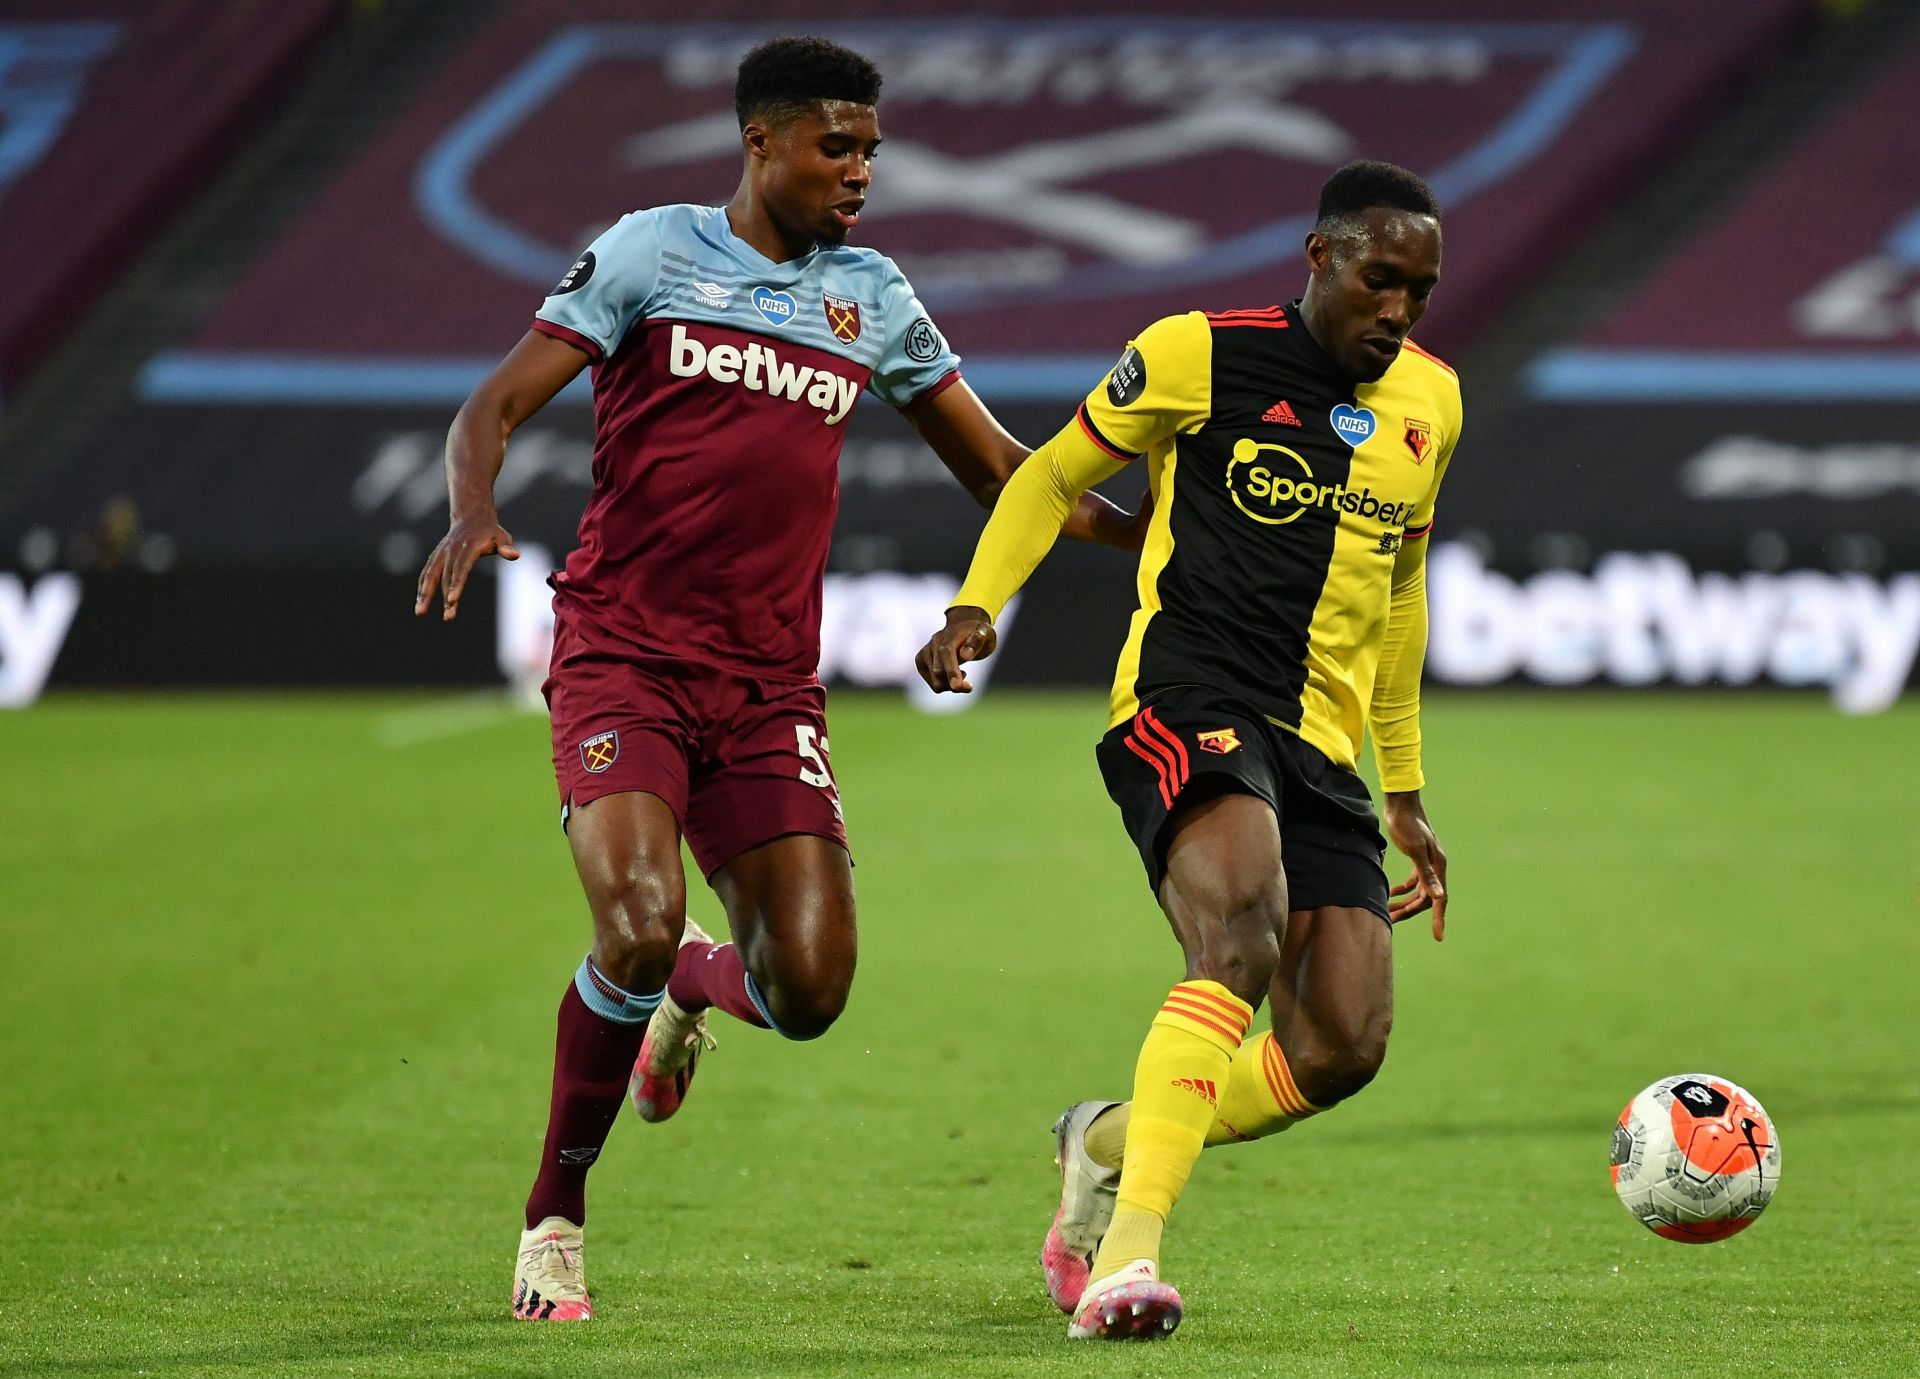 Watford play host to West Ham United on Tuesday